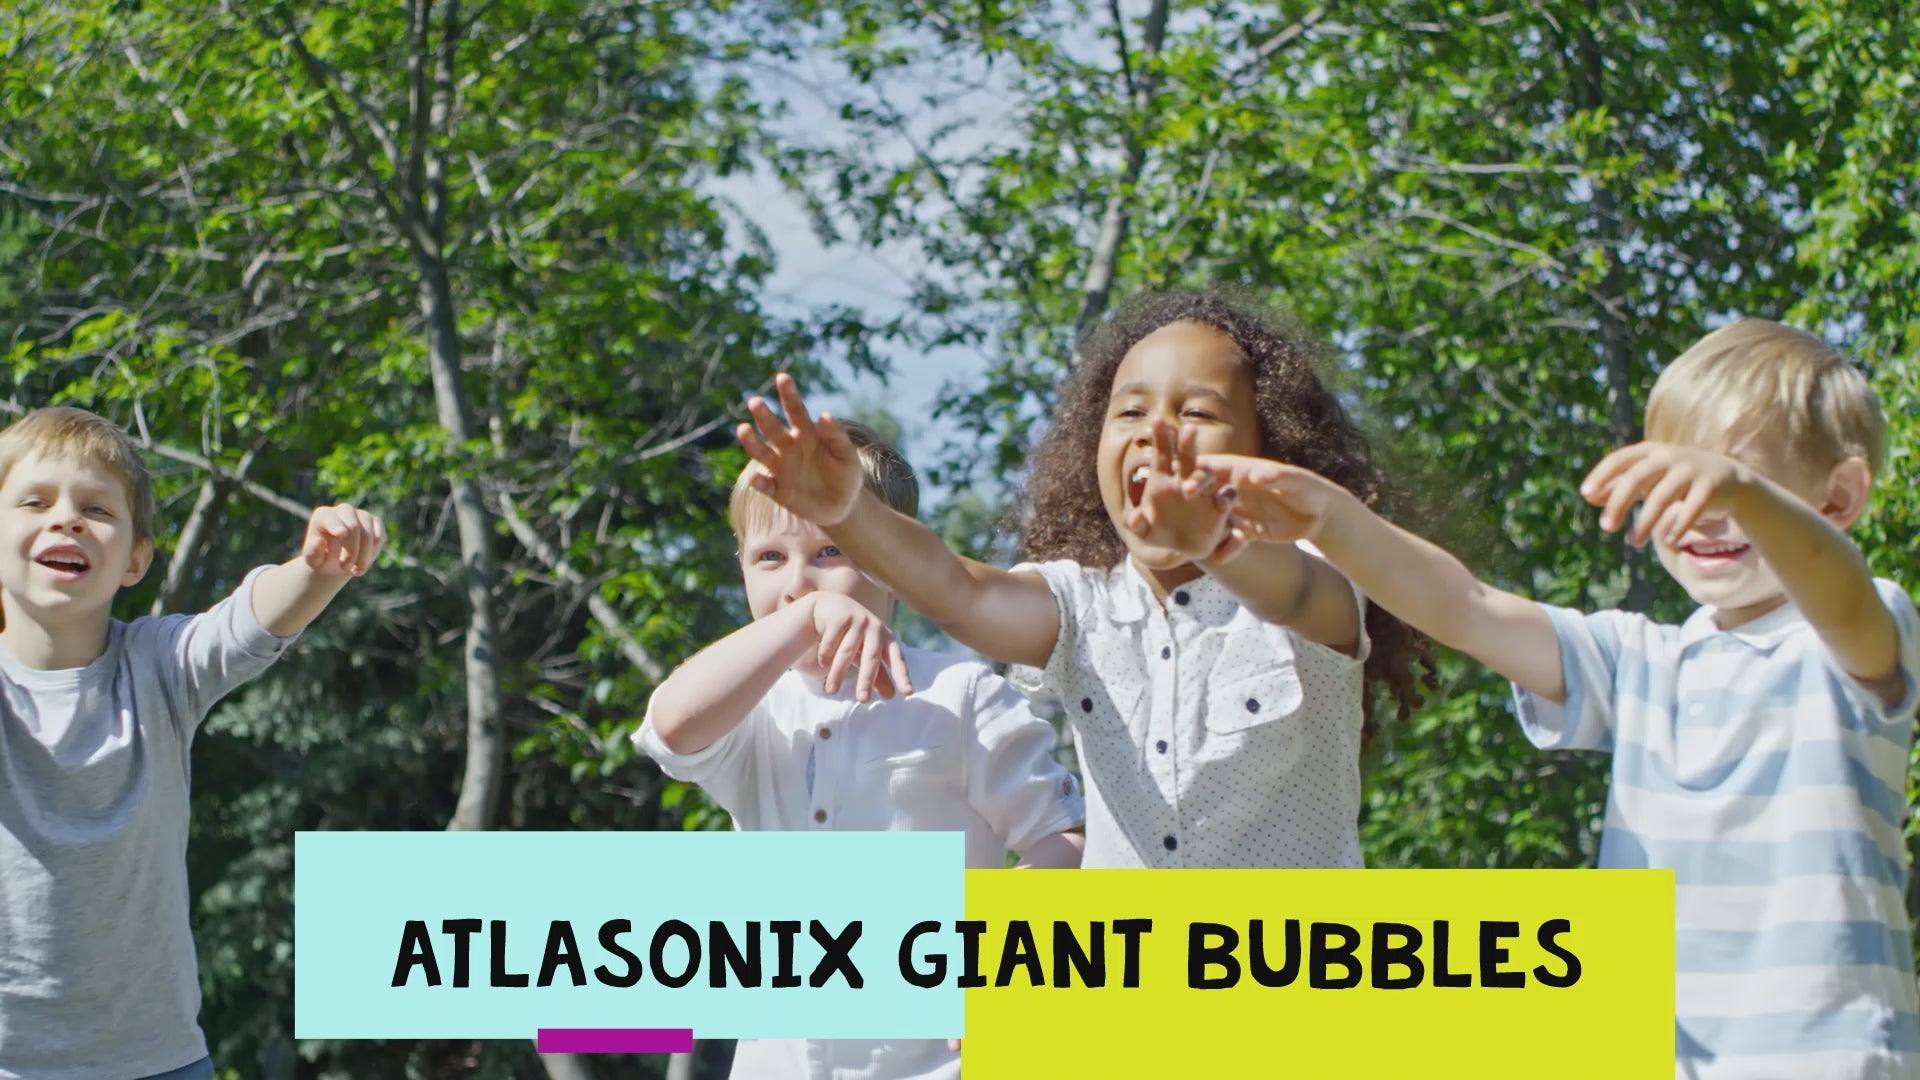 DIY GIANT BUBBLES for kids! Family Fun playtime with bubble toys